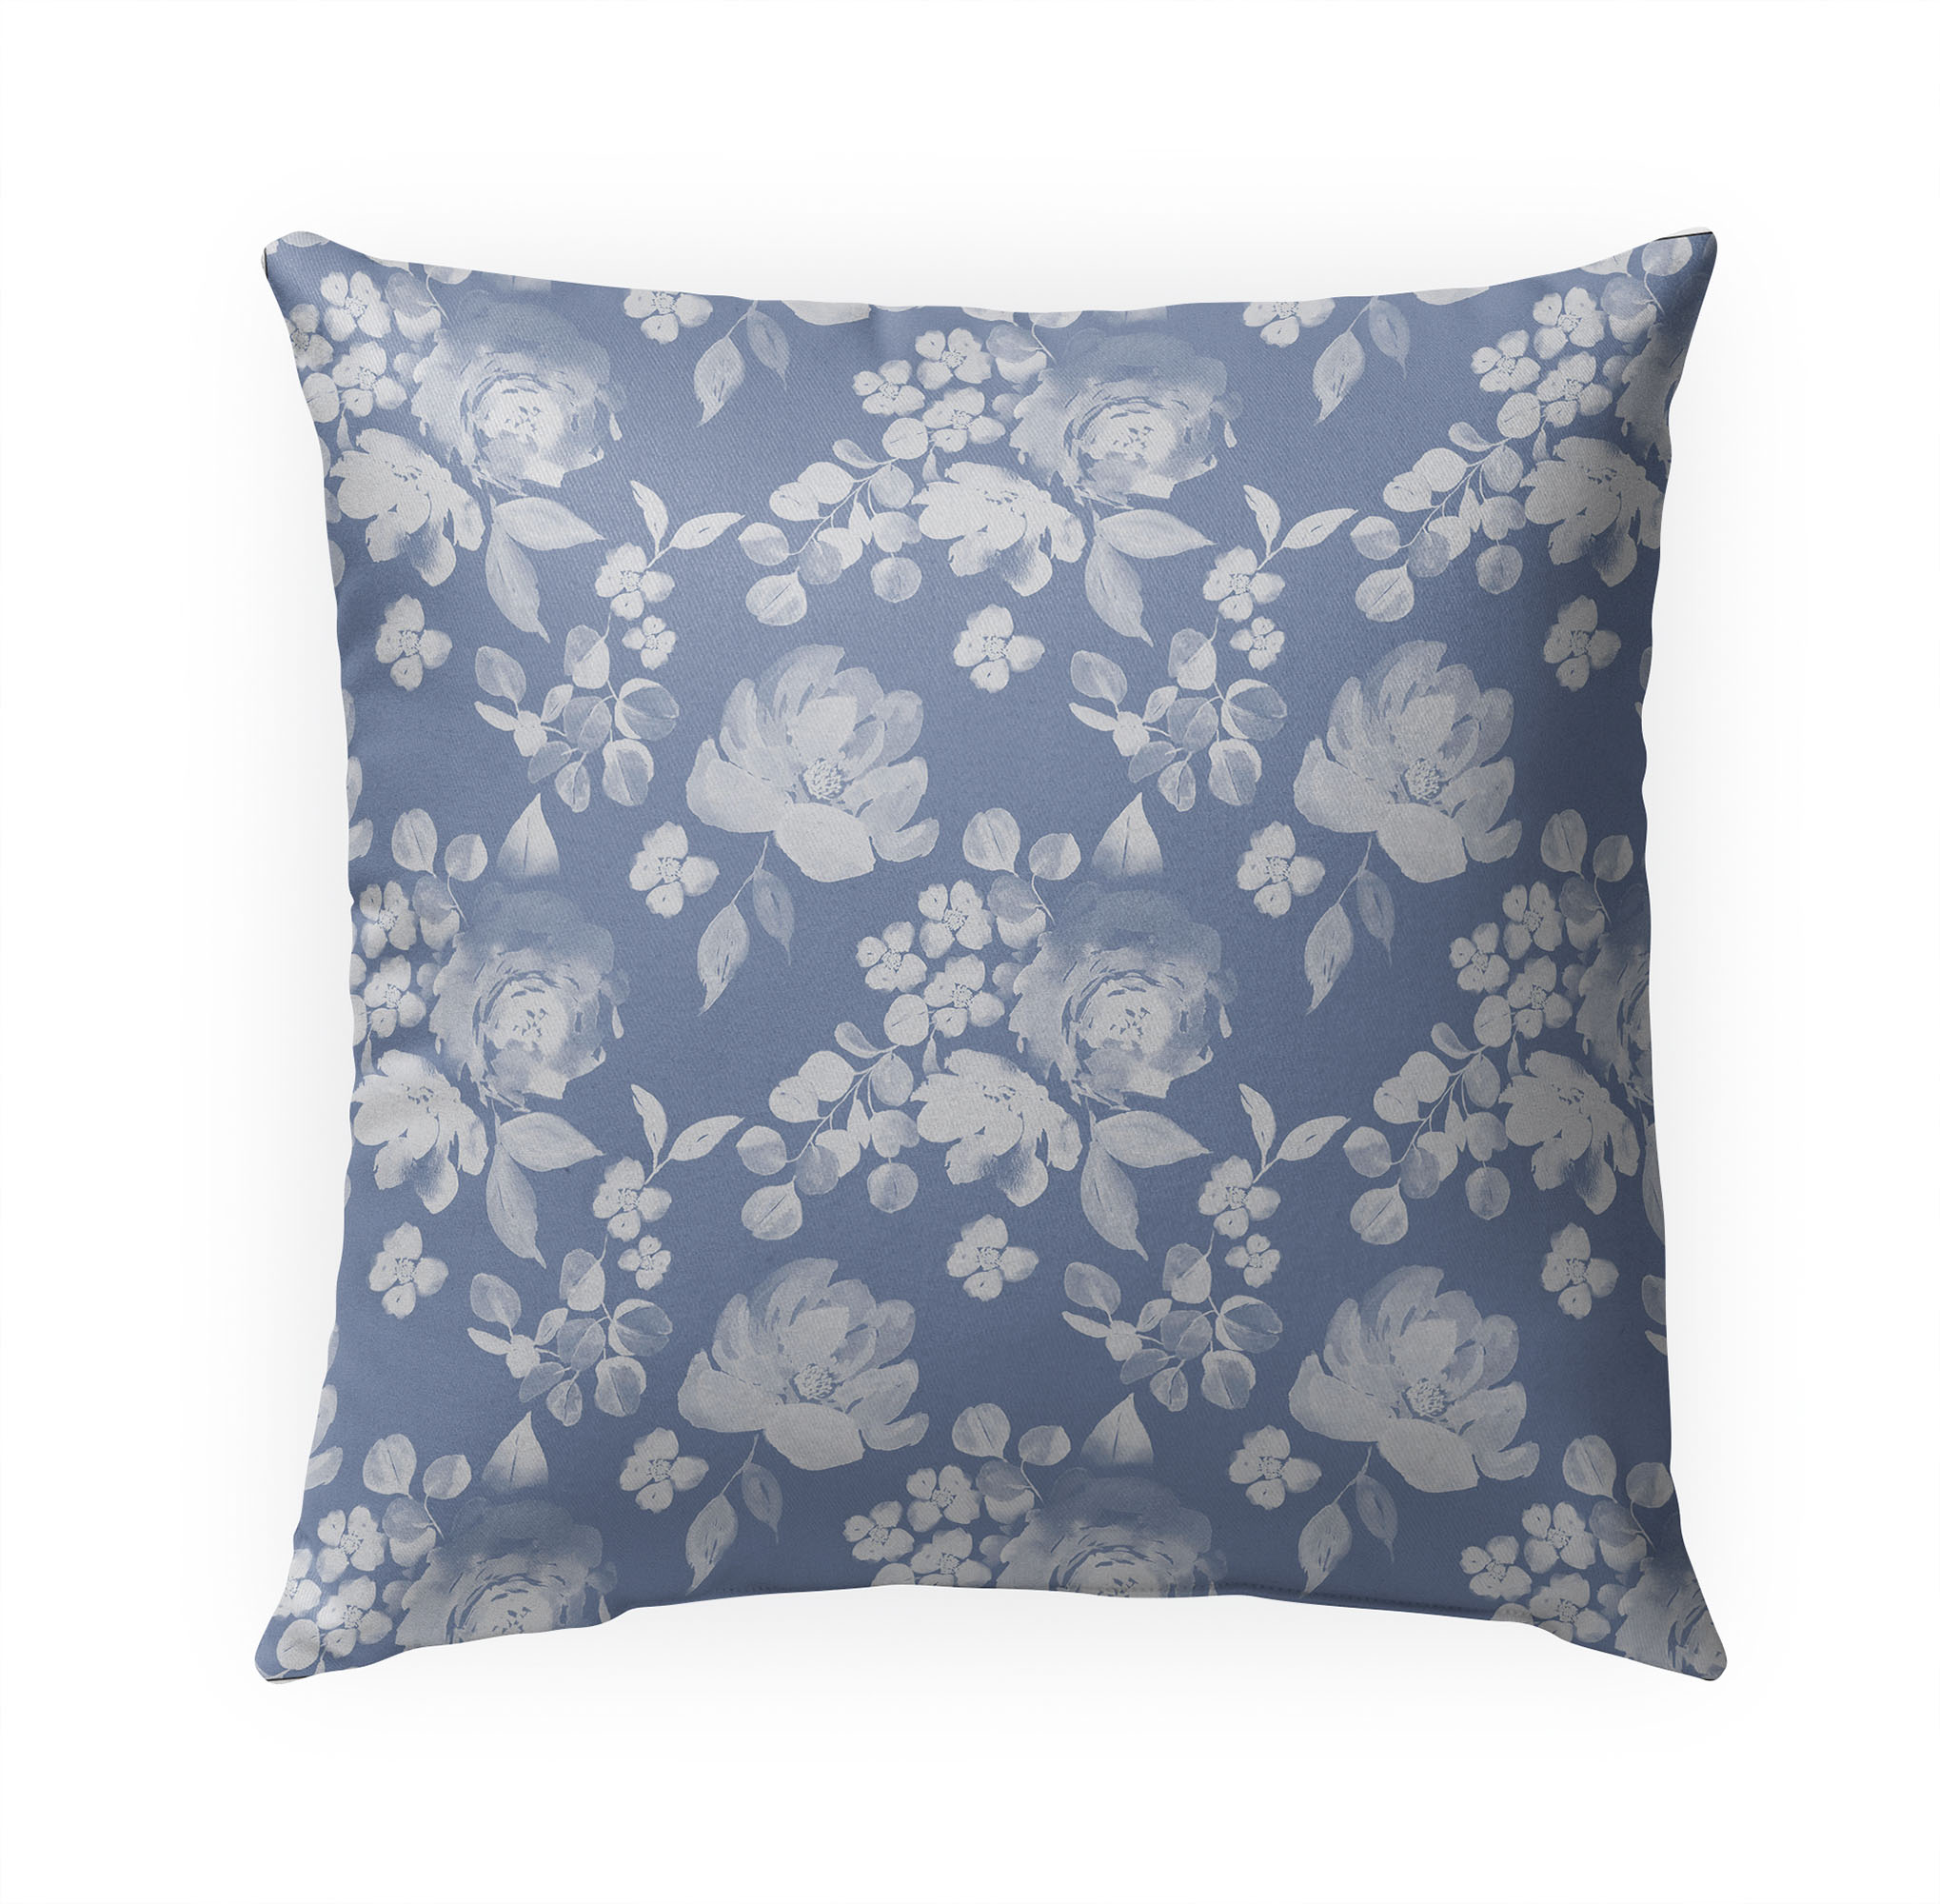 Cottage Blue Outdoor Pillow by Kavka Designs - image 1 of 5